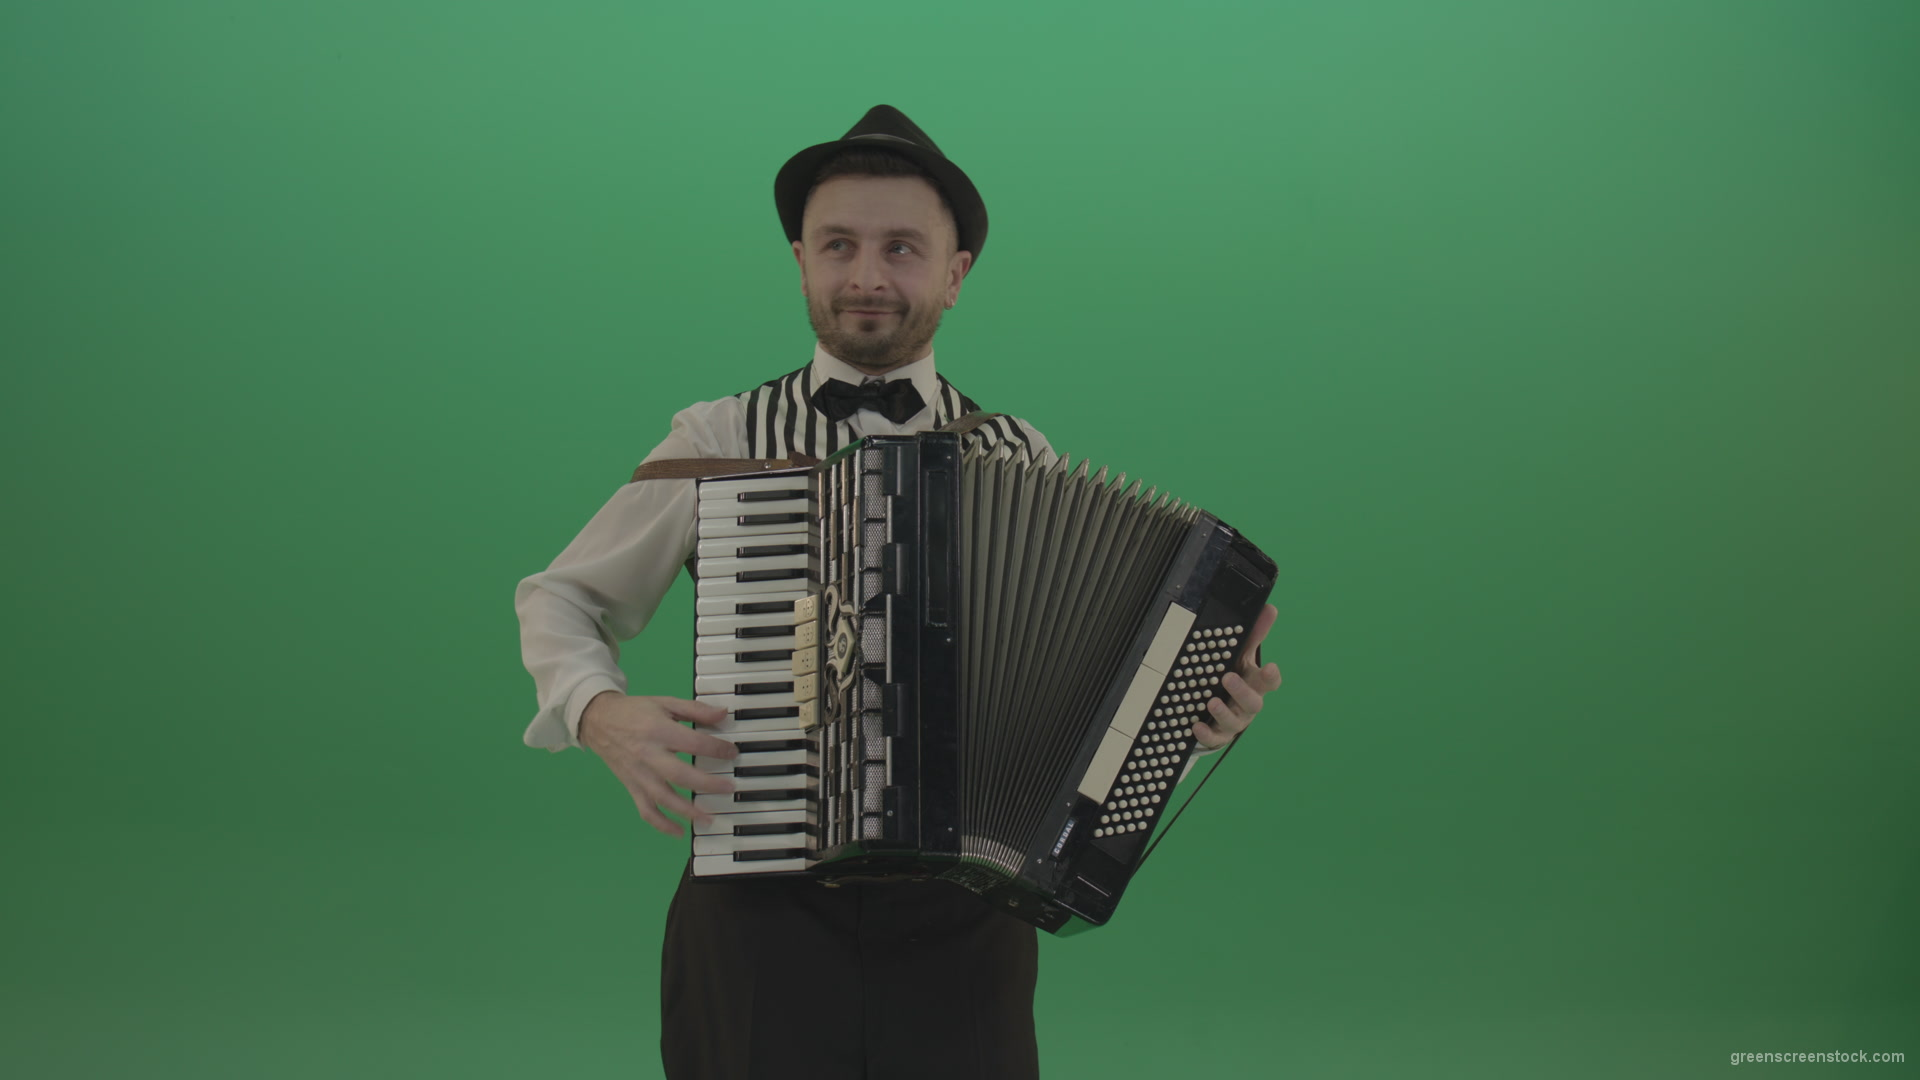 Virtuoso-player-man-with-Accordion-isolated-on-green-screen-in-front-view-1_008 Green Screen Stock